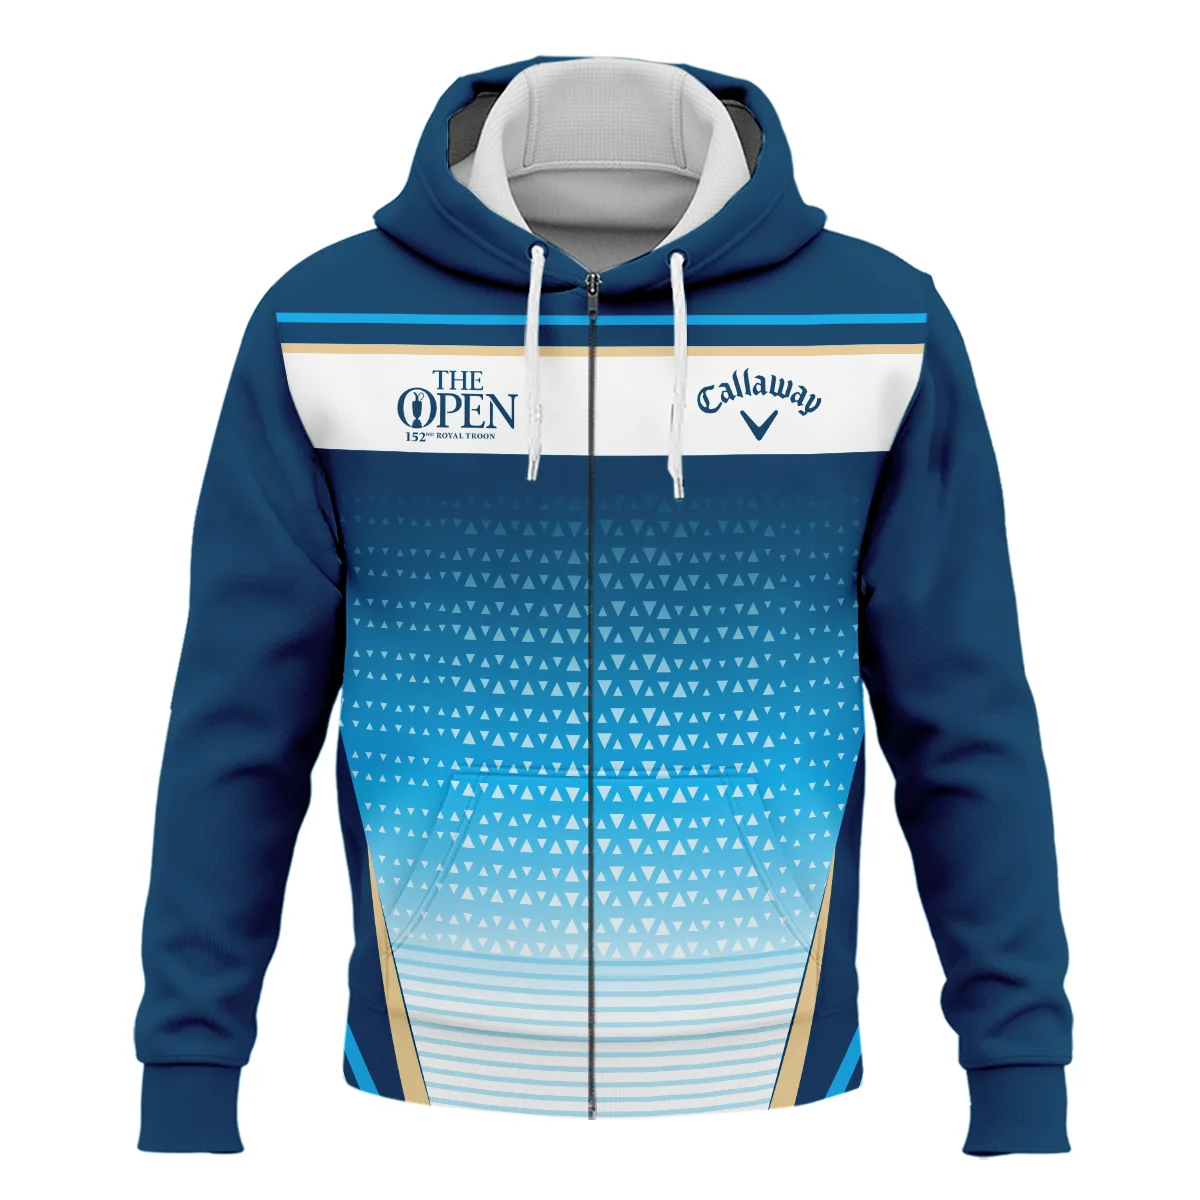 152nd The Open Championship Golf Blue Yellow White Pattern Background Callaway Quarter-Zip Jacket All Over Prints HOTOP250624A01CLWSWZ